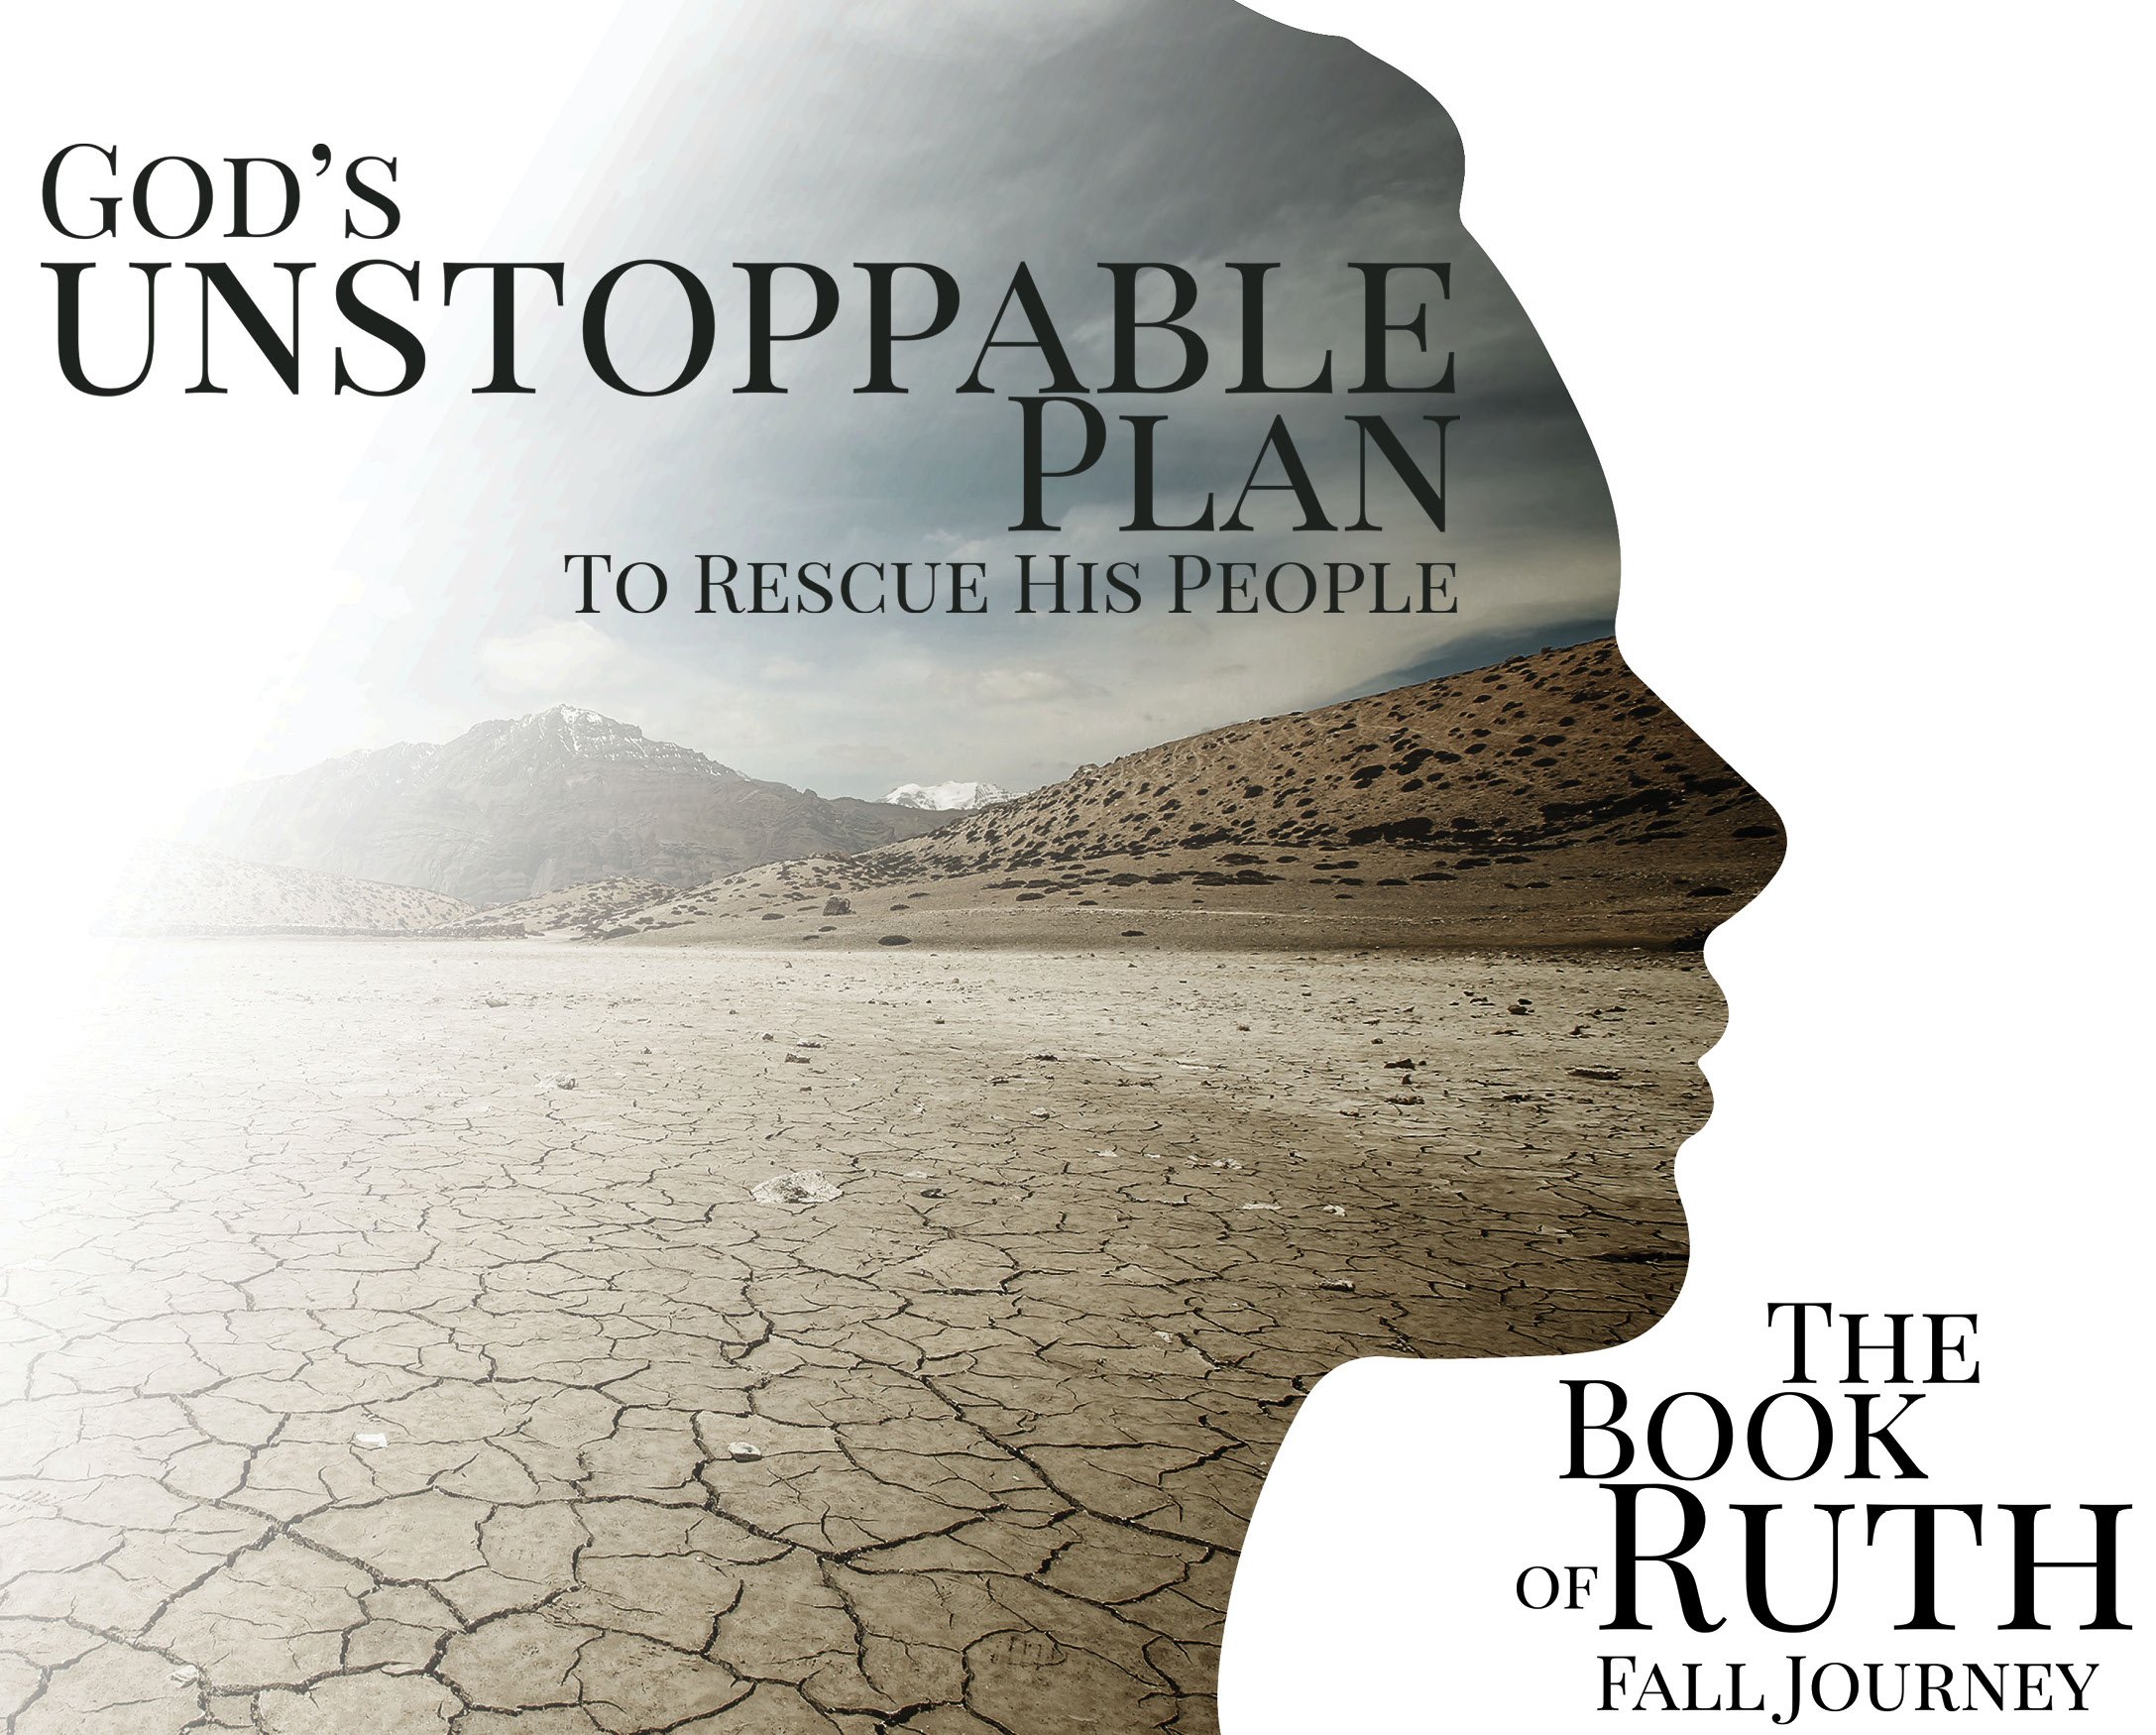 God’s Unstoppable Plan to Rescue His People: Plan